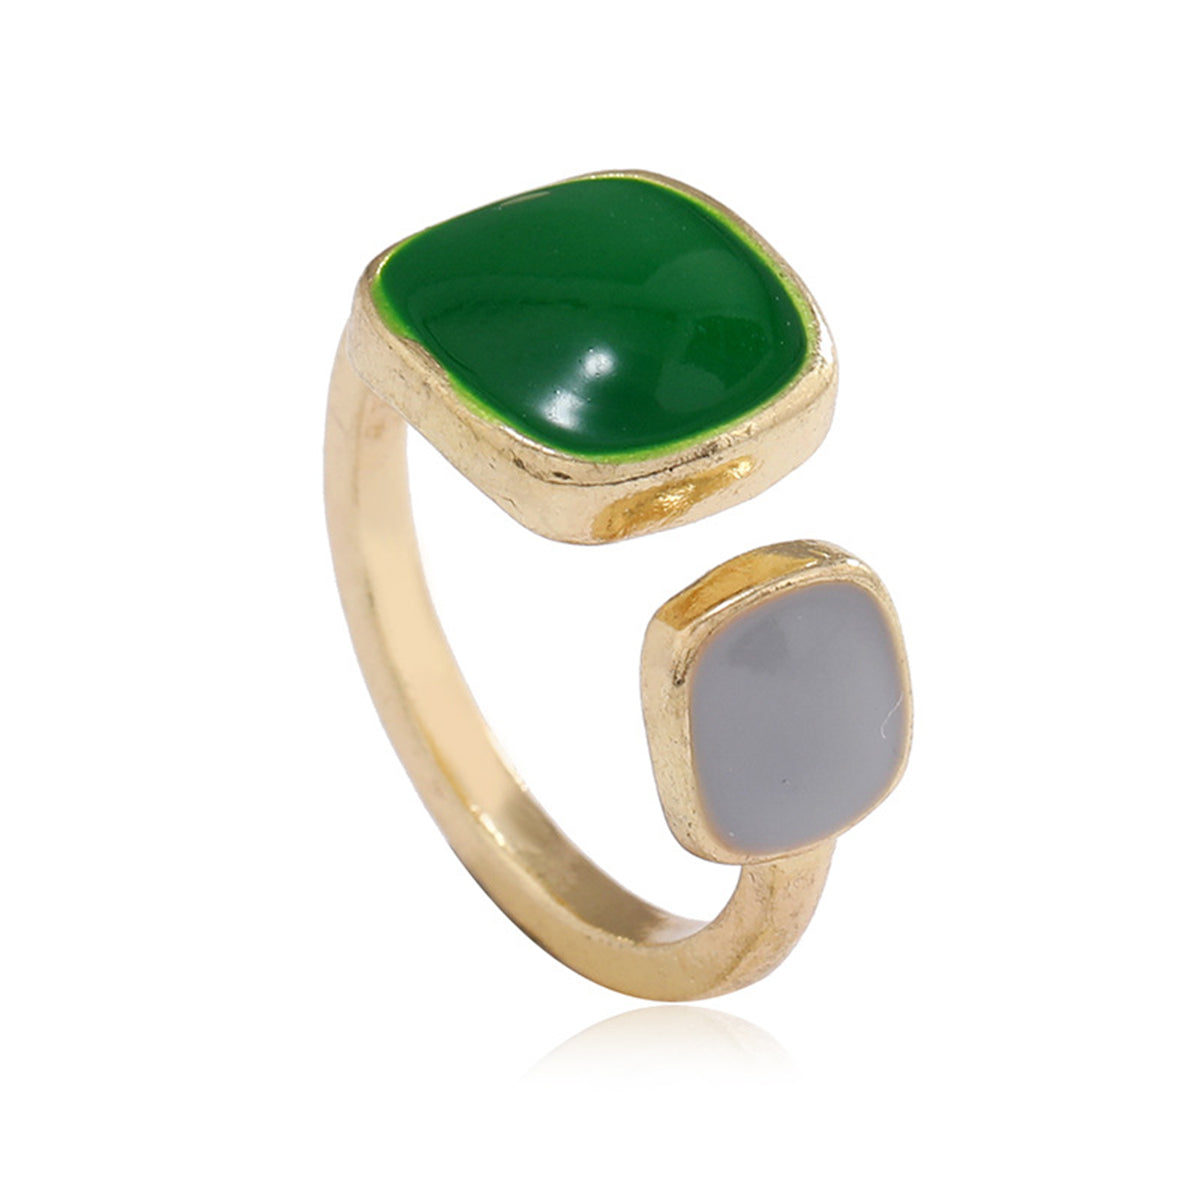 Green Enamel & 18K Gold-Plated Square Bypass Ring